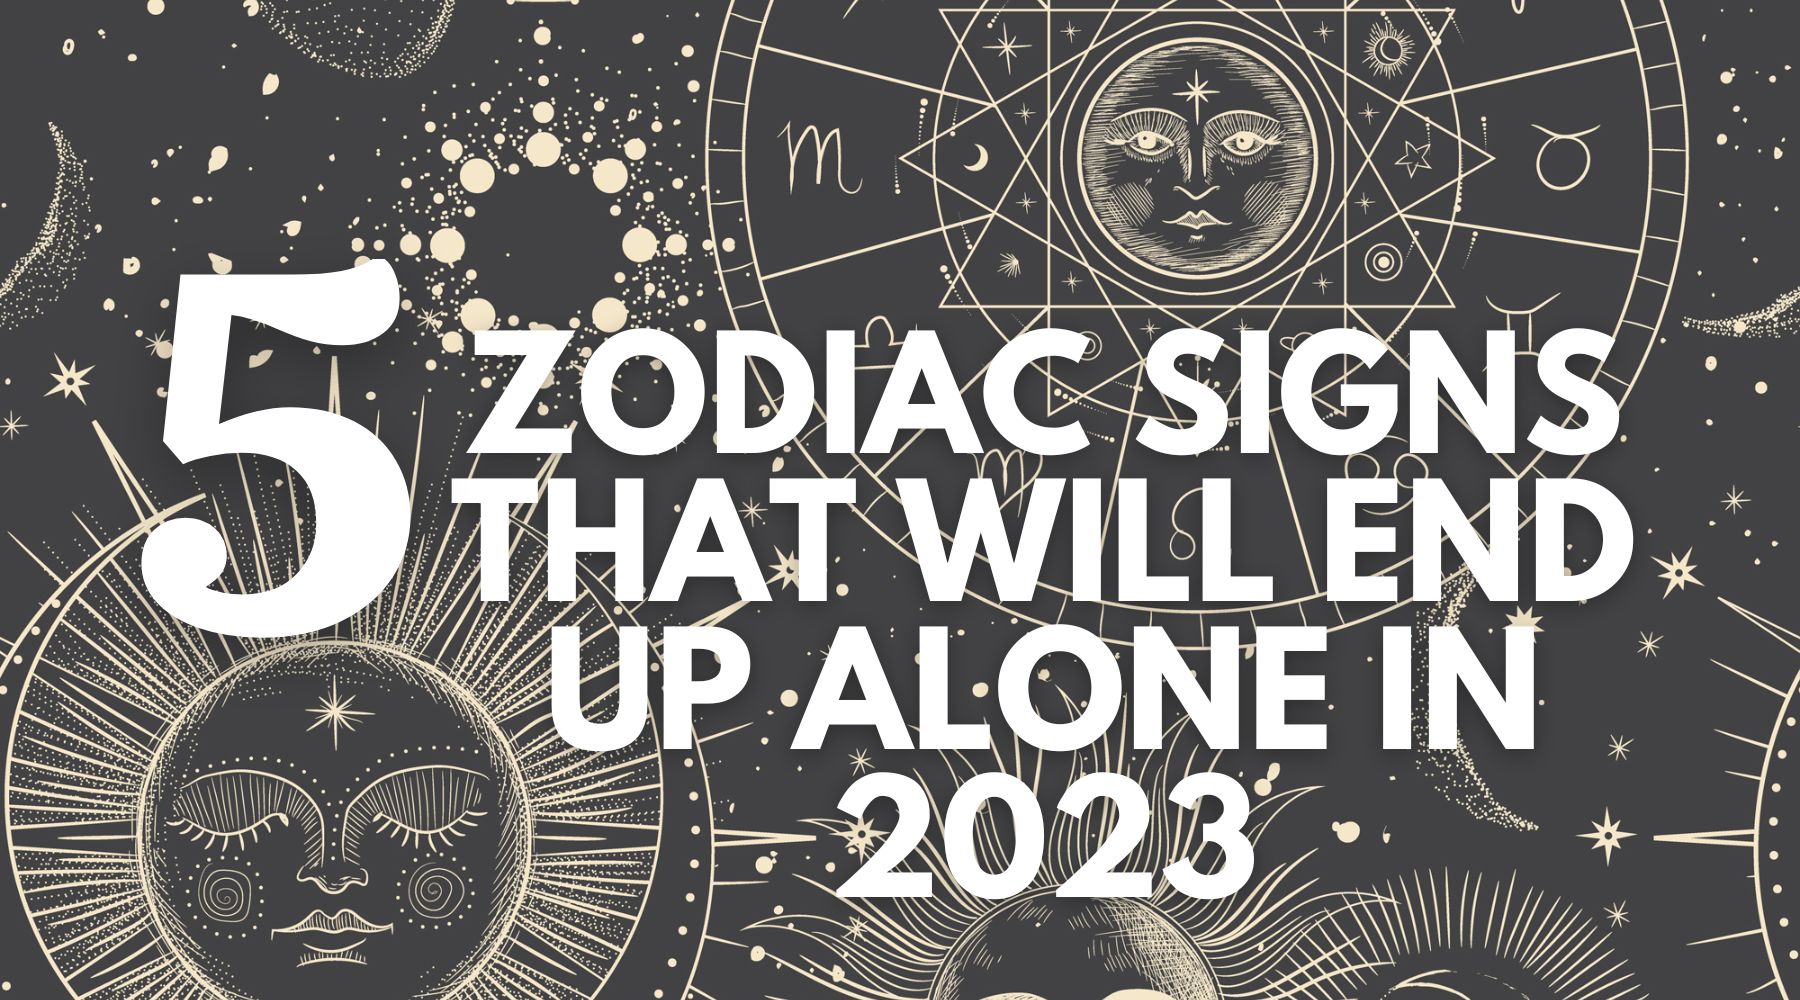 5 zodiac signs that will end up alone in 2023-Should you start packing those tissues?